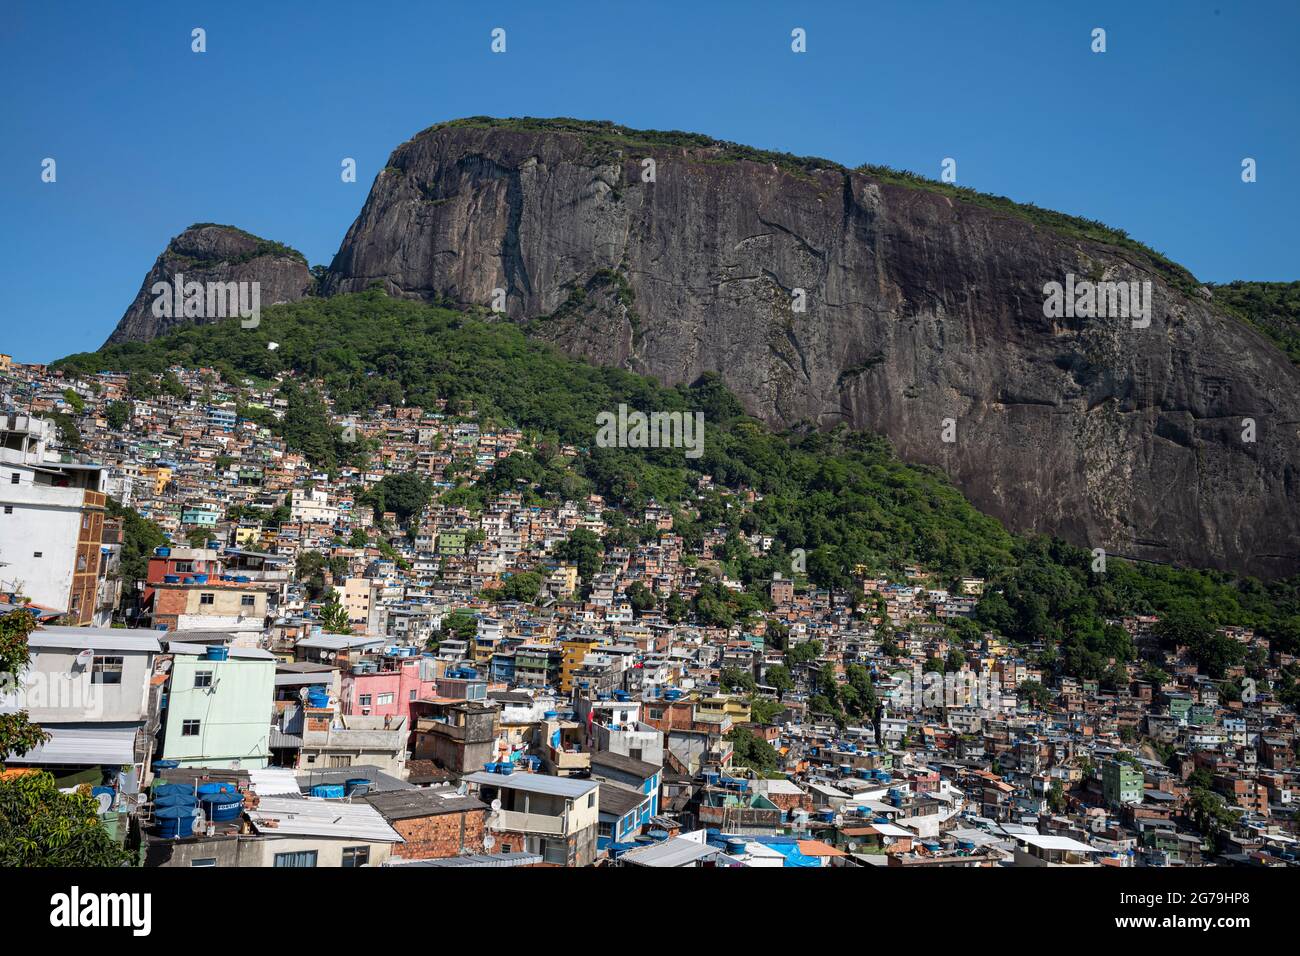 Inside Rocinha. The largest favela in Brazil, located in Rio de Janeiro's South Zone between the districts of SÃ£o Conrado and Gávea. Stock Photo